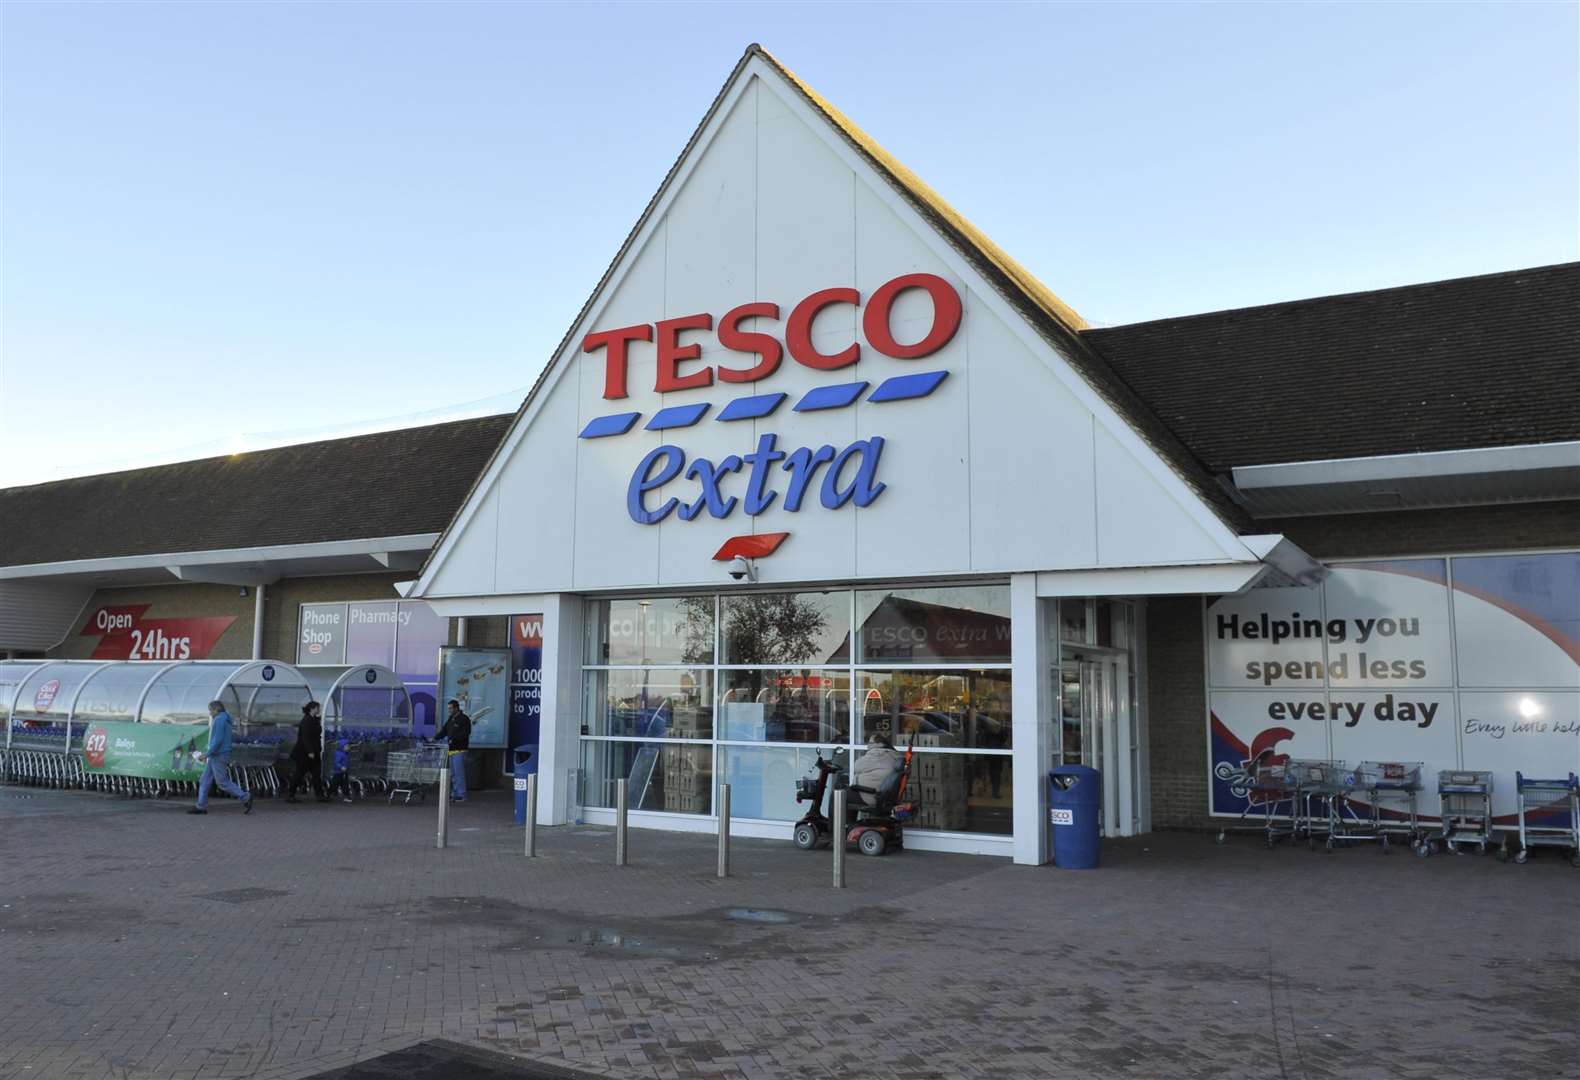 The ups and downs of Tesco in Kent as it celebrates 100 years